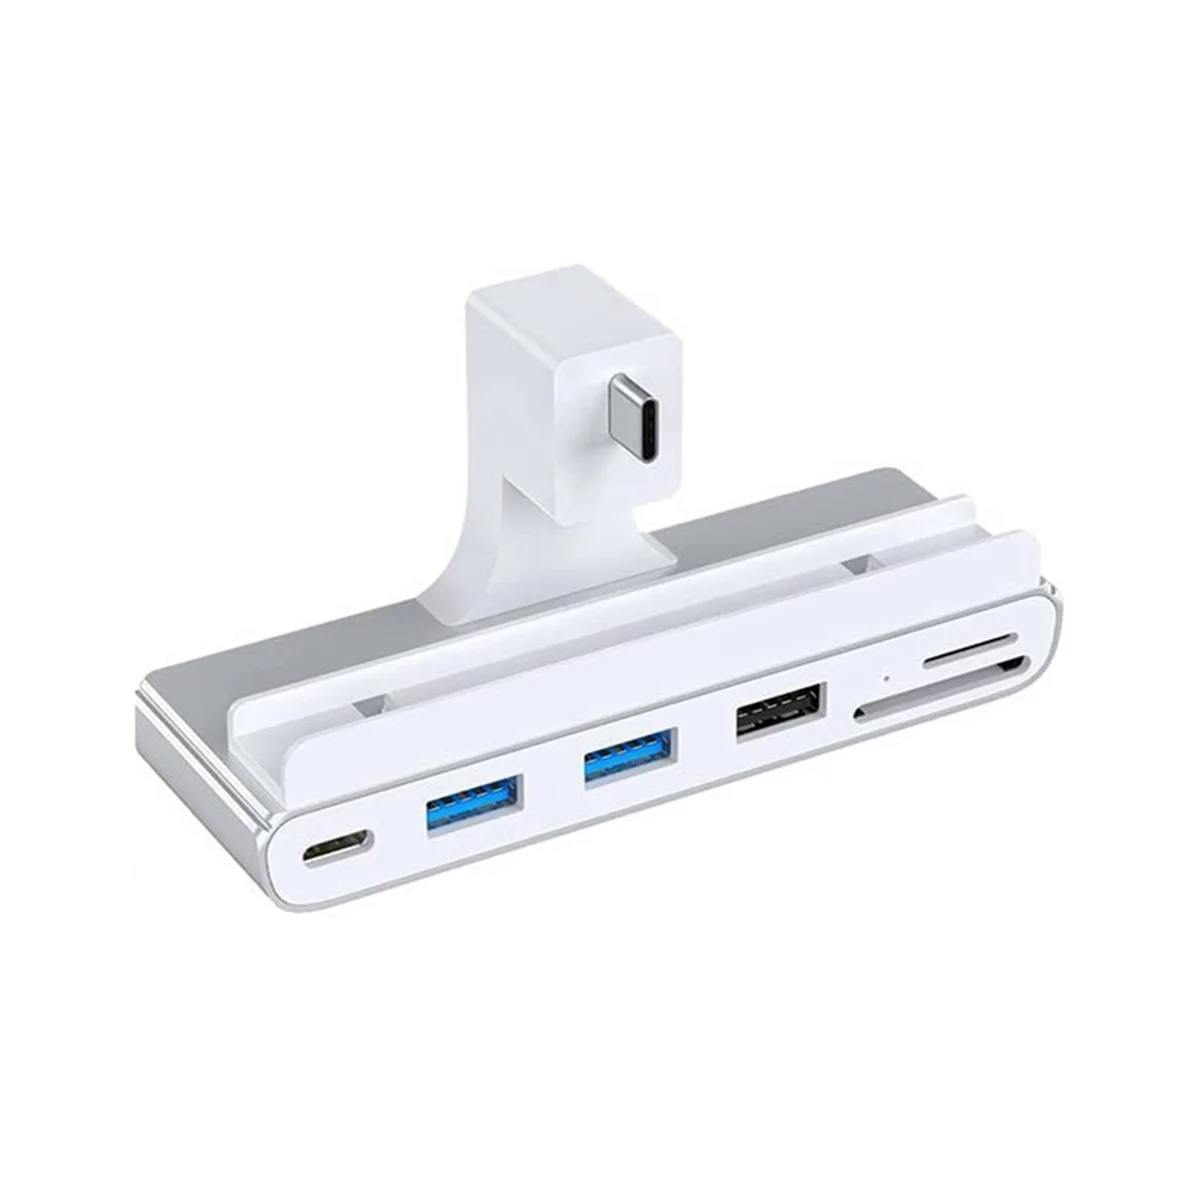 

6 in 1 Type-C USB C Hub TF SD Card Reader for IMac iPad Hub Docking Station USB C for Laptops Support SD TF